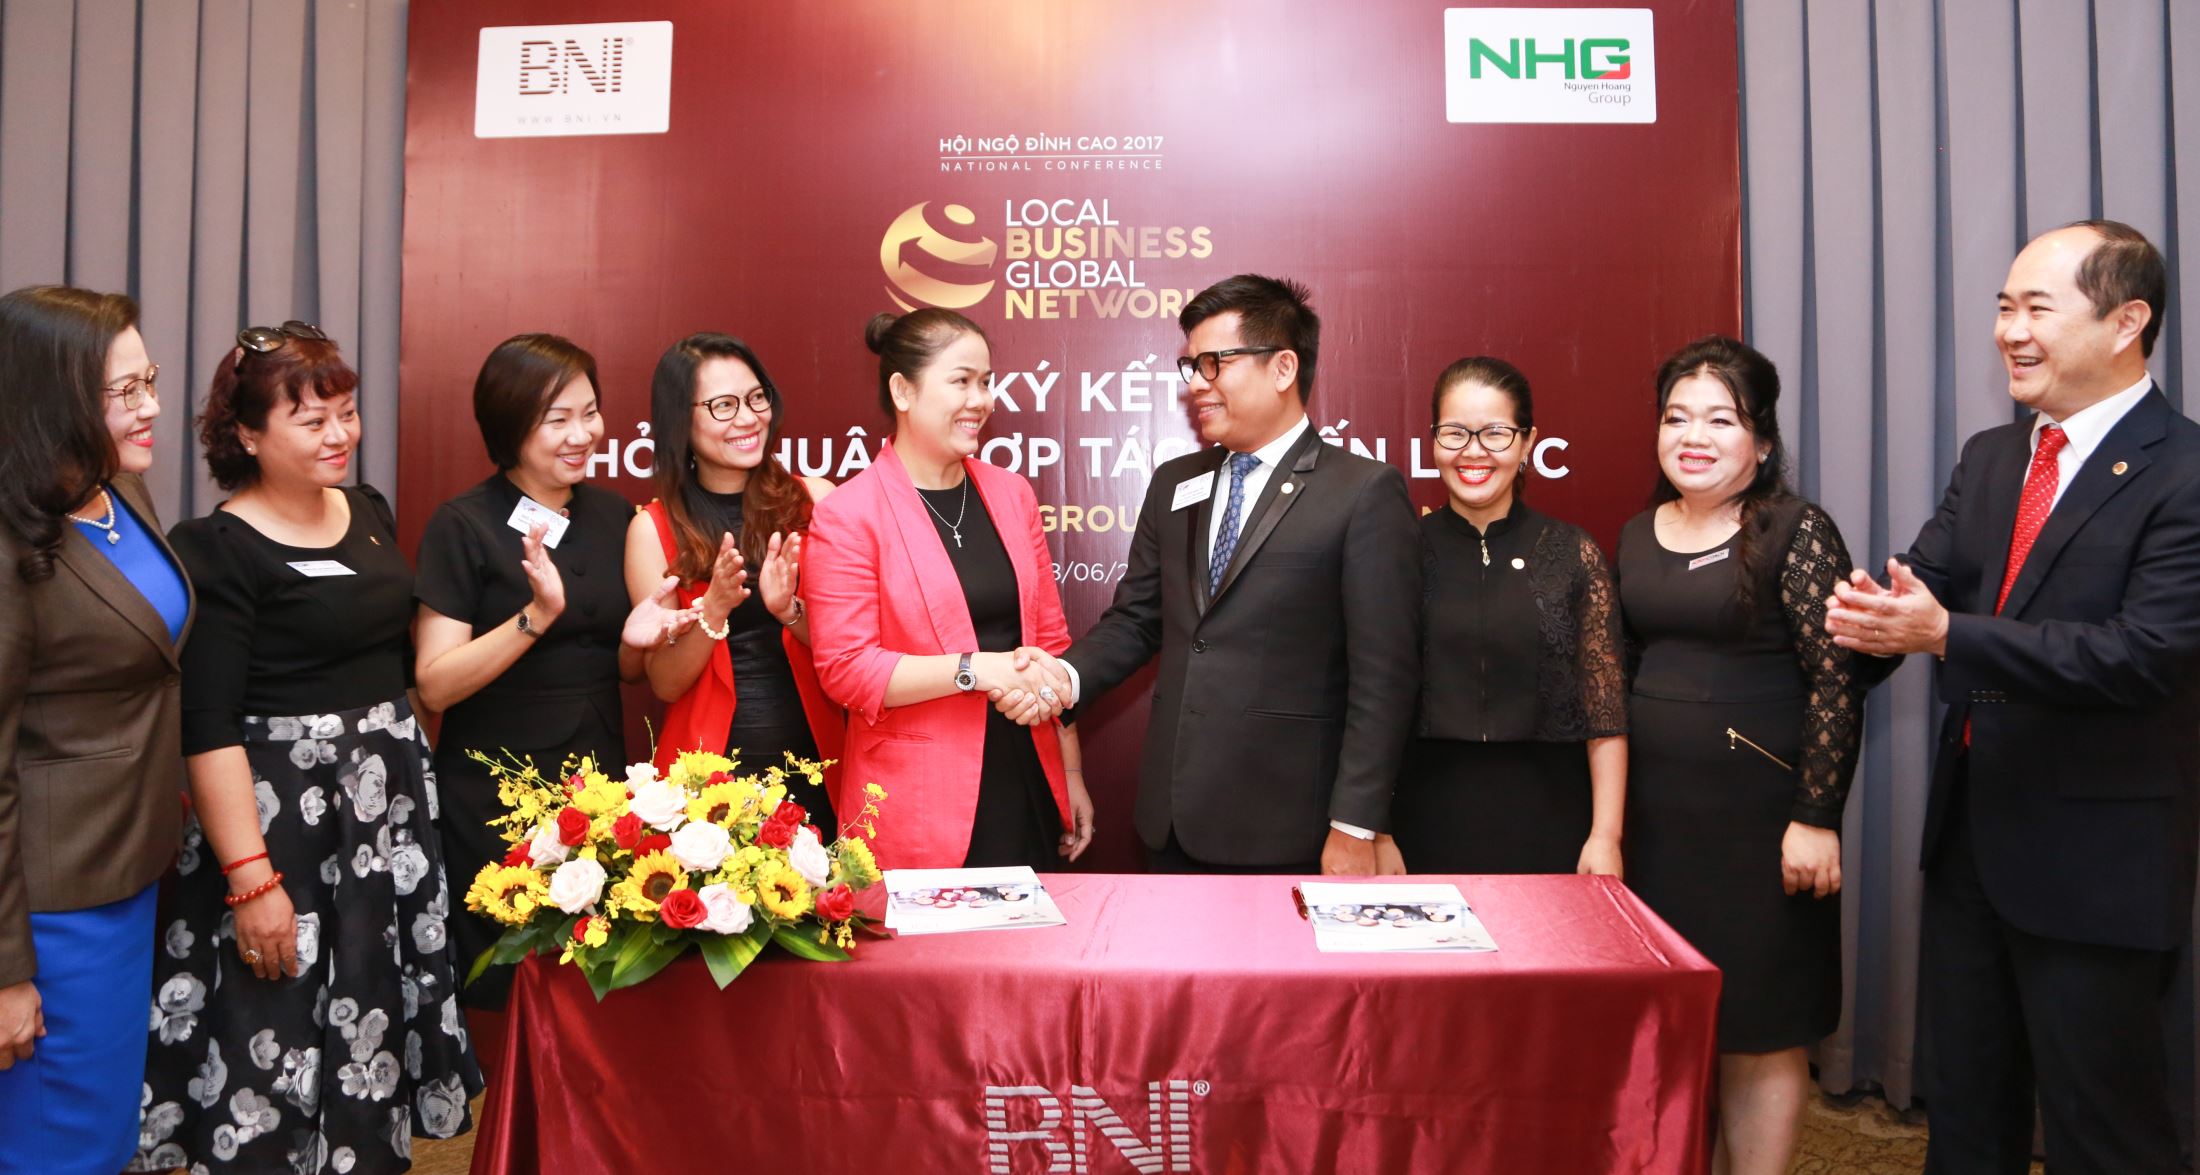 Ms. Hoang Nguyen Thu Thao, CEO of  NHG and Mr. Nguyen Kien Tri, Vice President of BNI Vietnam, constructing the signing ceremony, in the presence of Mr. Ho Quang Minh, Chairman of BNI Vietnam, BNI's regional leaders as well as businesspeople in BNI network and the media.